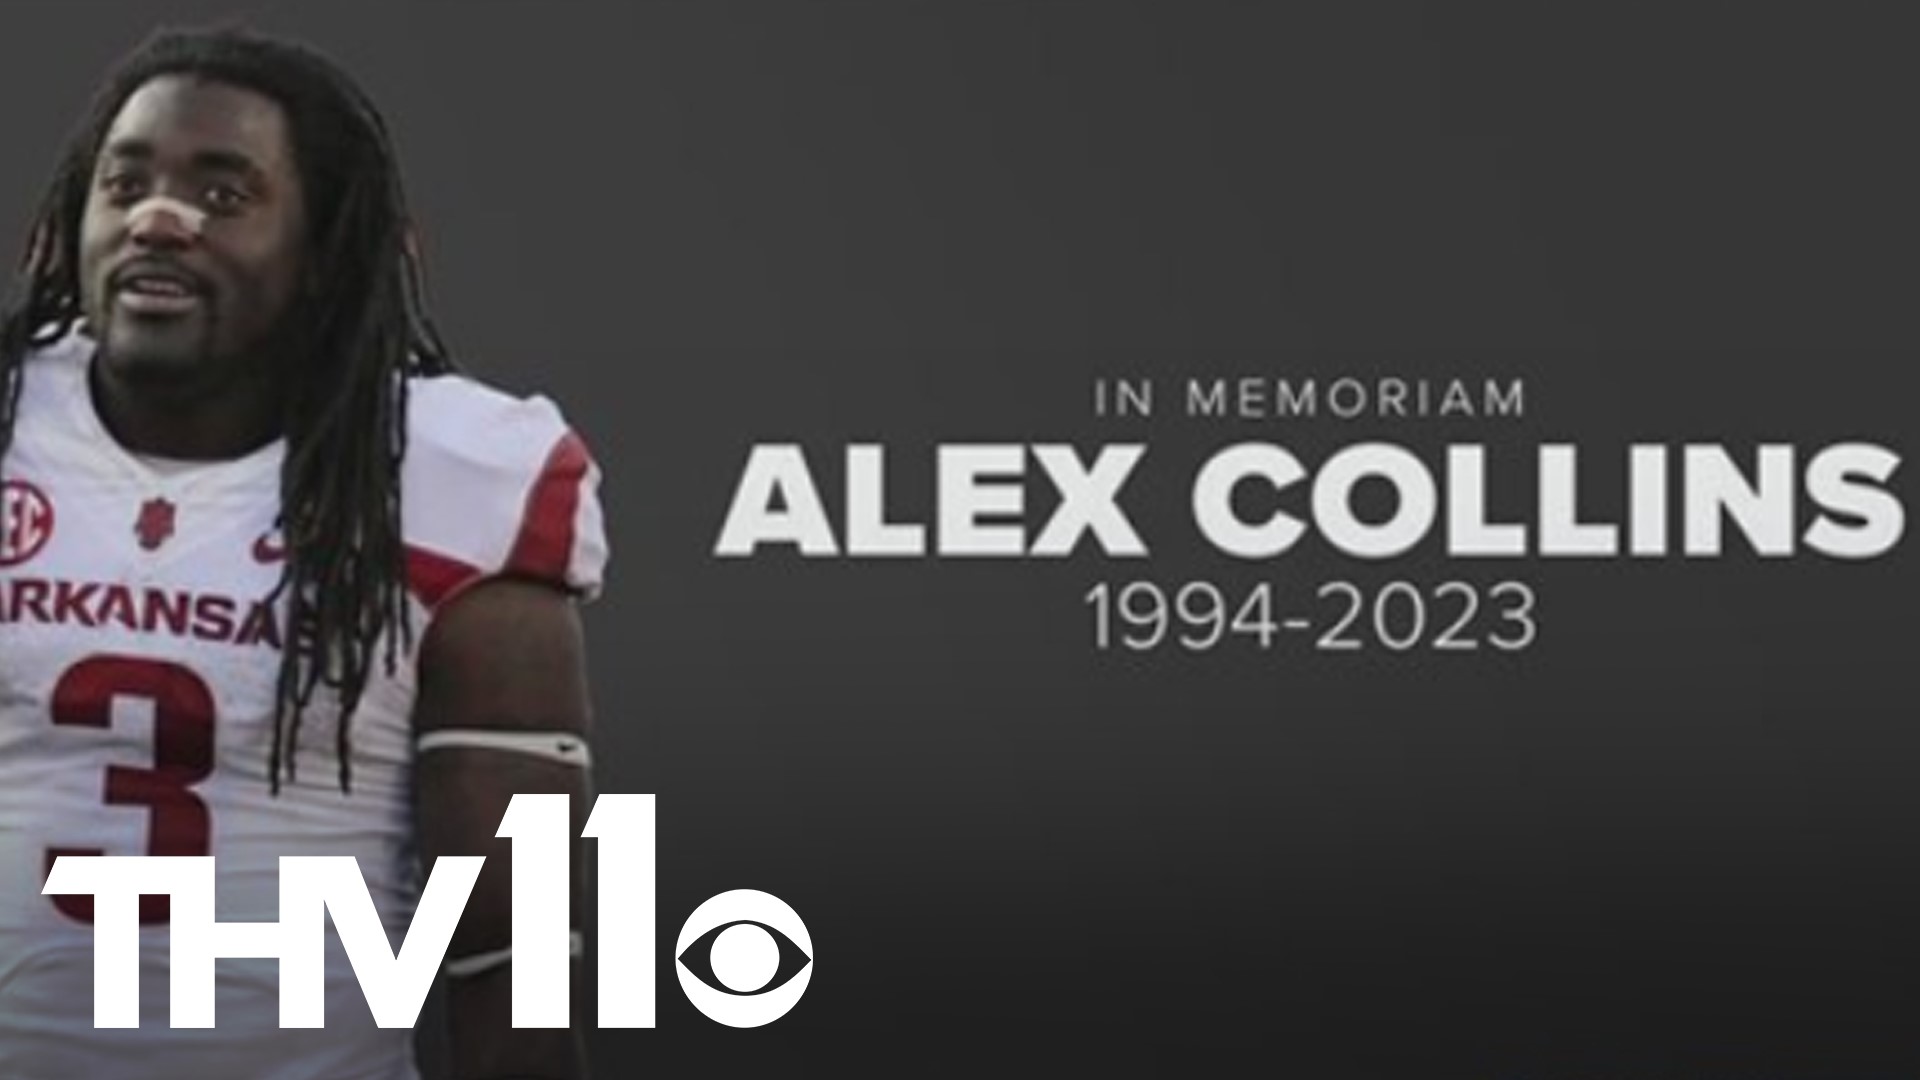 It has been confirmed that former Arkansas Razorback running back Alex Collins died just days before his 29th birthday.